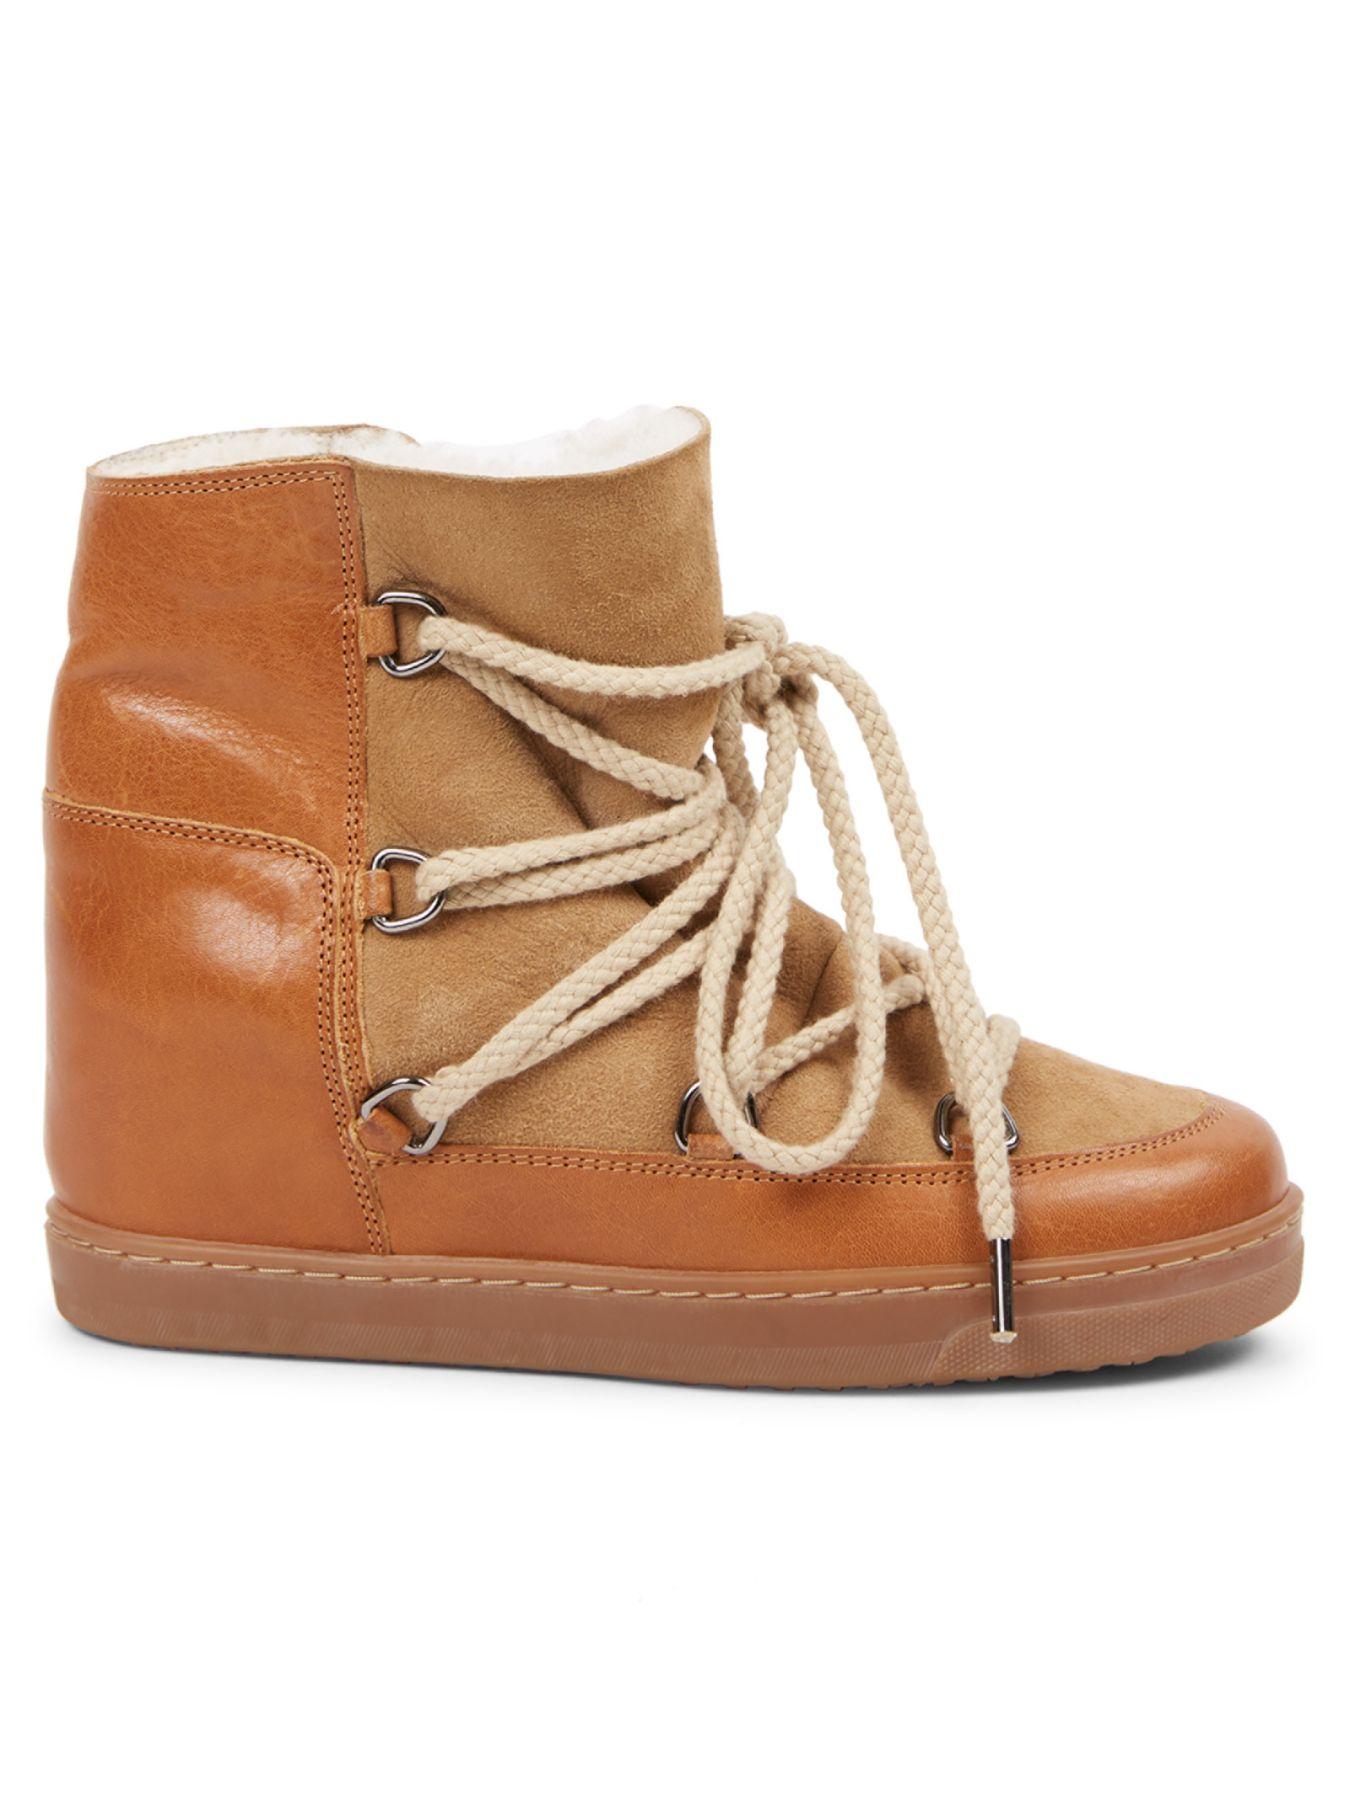 Isabel Marant Nowles Shearling-lined Suede & Leather Boots in Camel ...